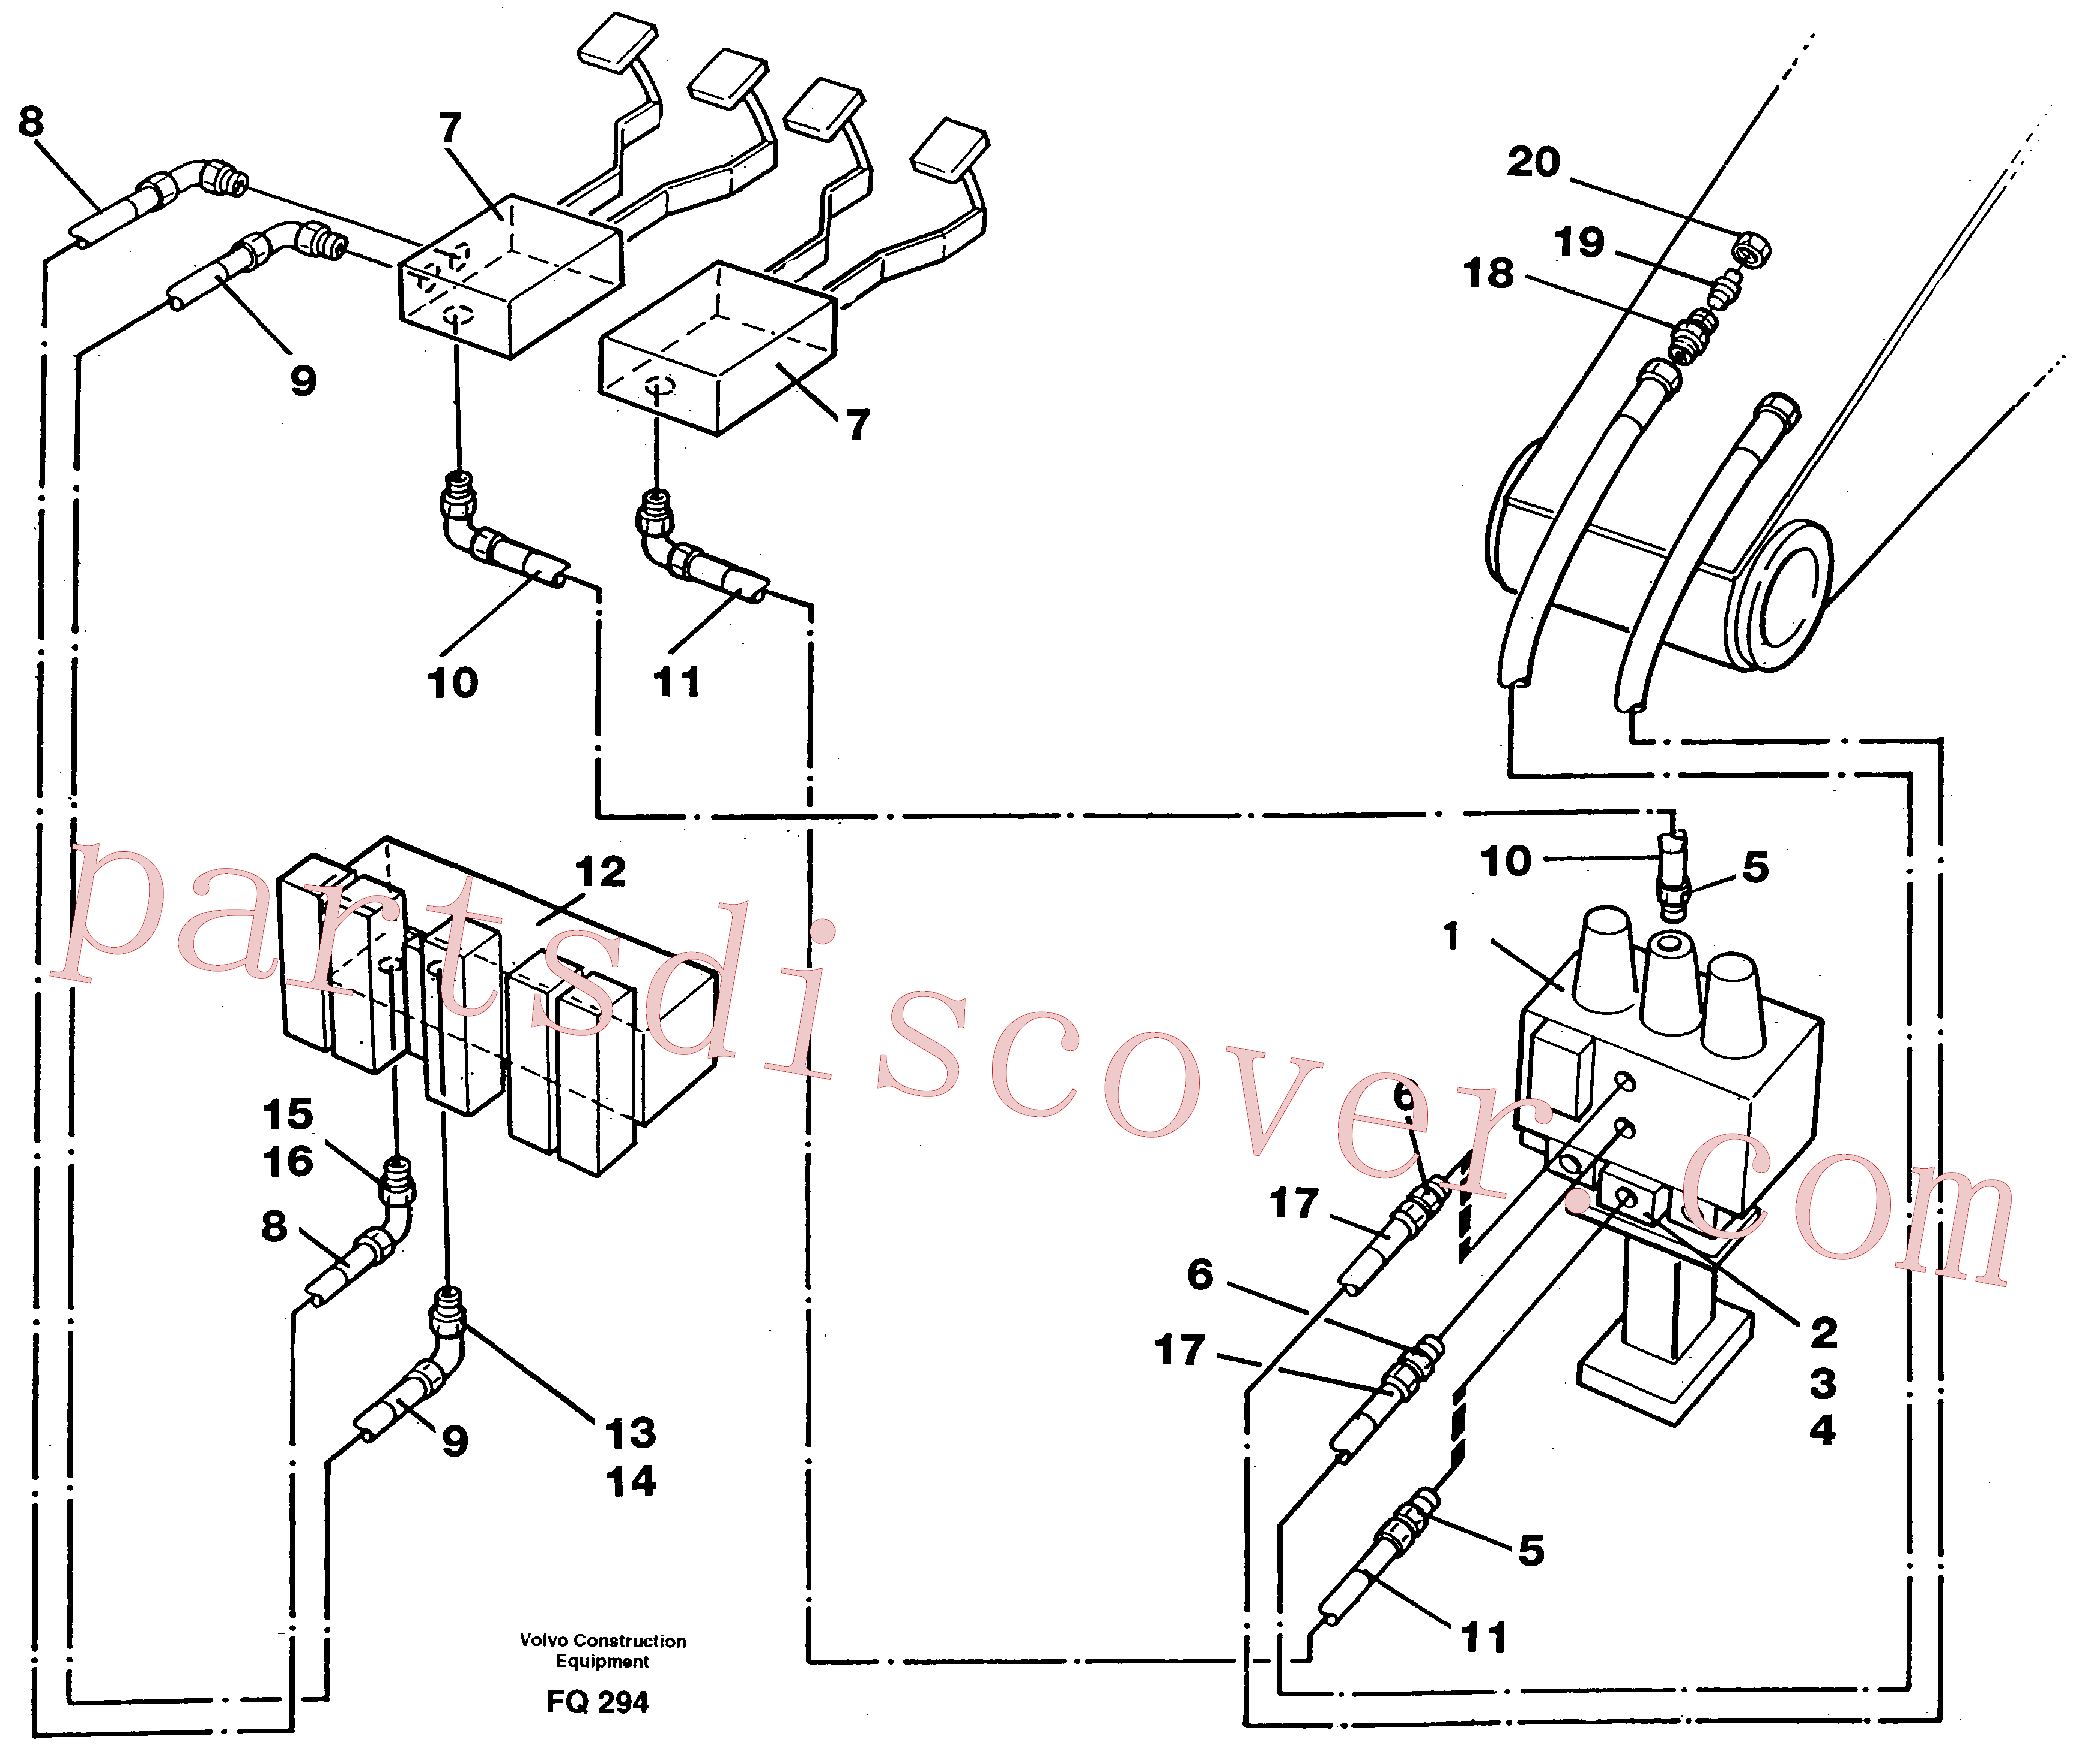 VOE14012404 for Volvo Slope bucket/rotator equipment for mono-boom in base machine(FQ294 assembly)